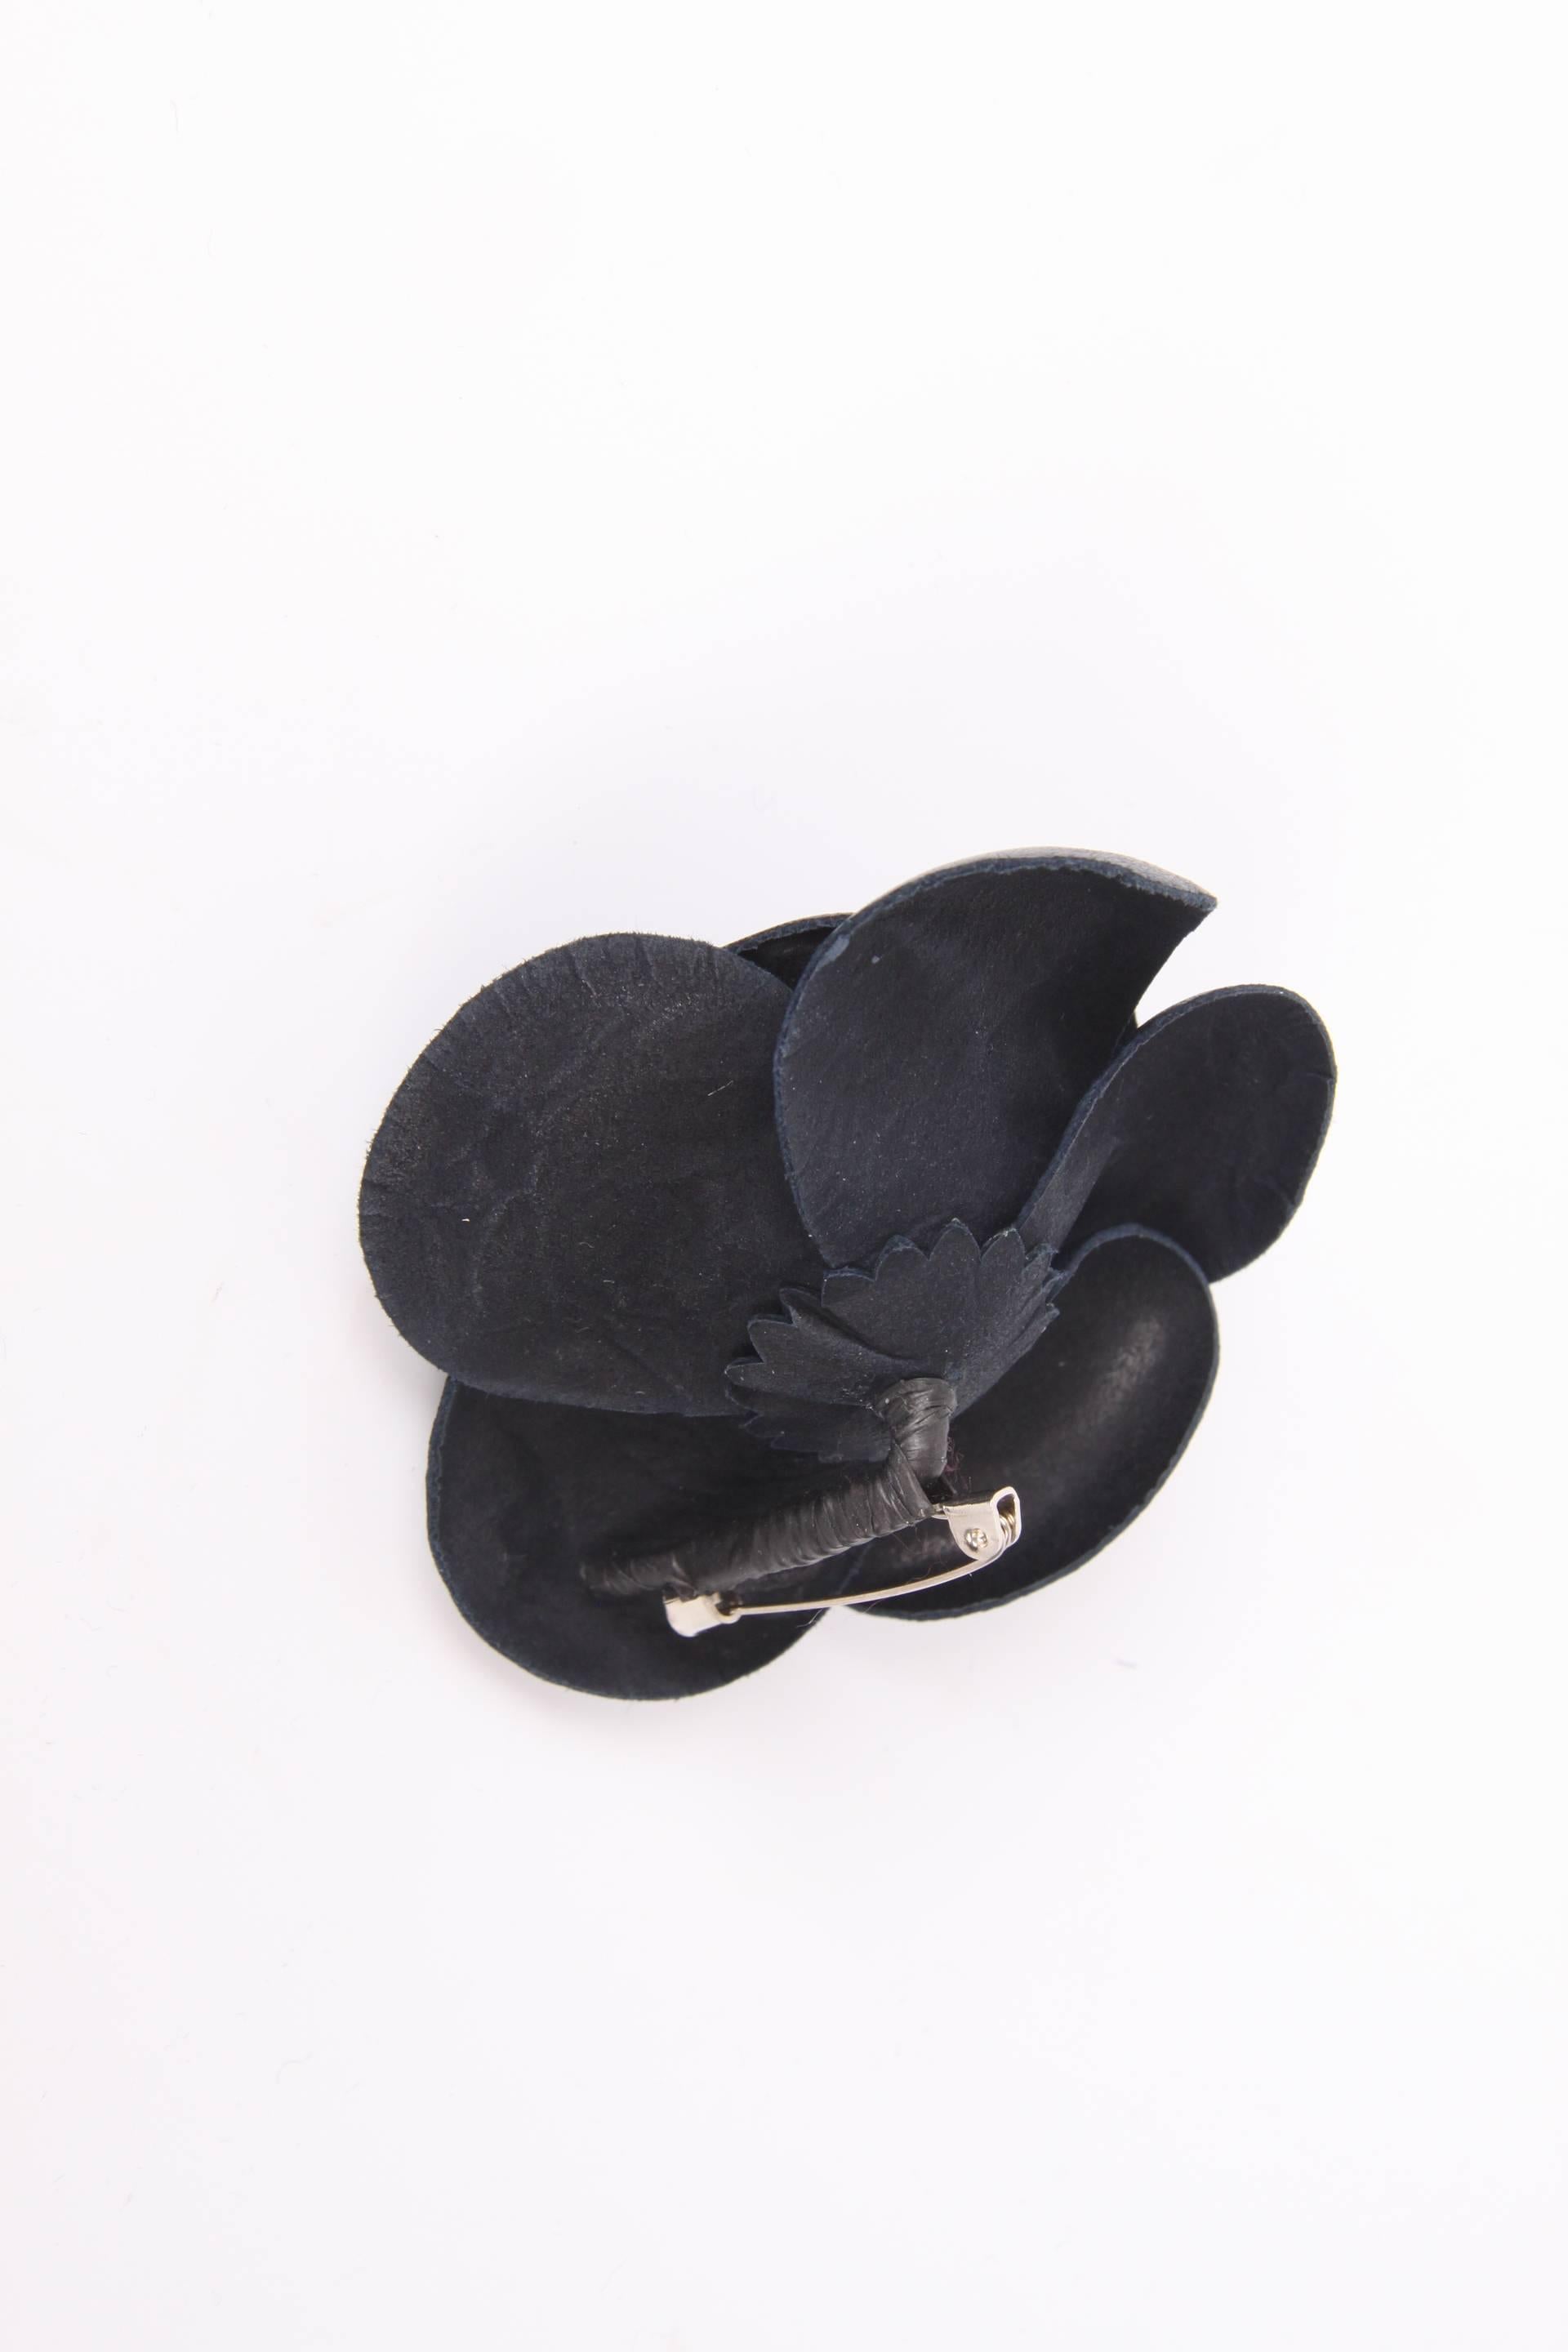 This one spices up every outfit! A leather camellia flower, known as the signature of Chanel, to be worn as a brooch!

It measures as much as 7,5 centimeters and is a real statement on your blouse or the lapels of your jacket. Fully made of dark